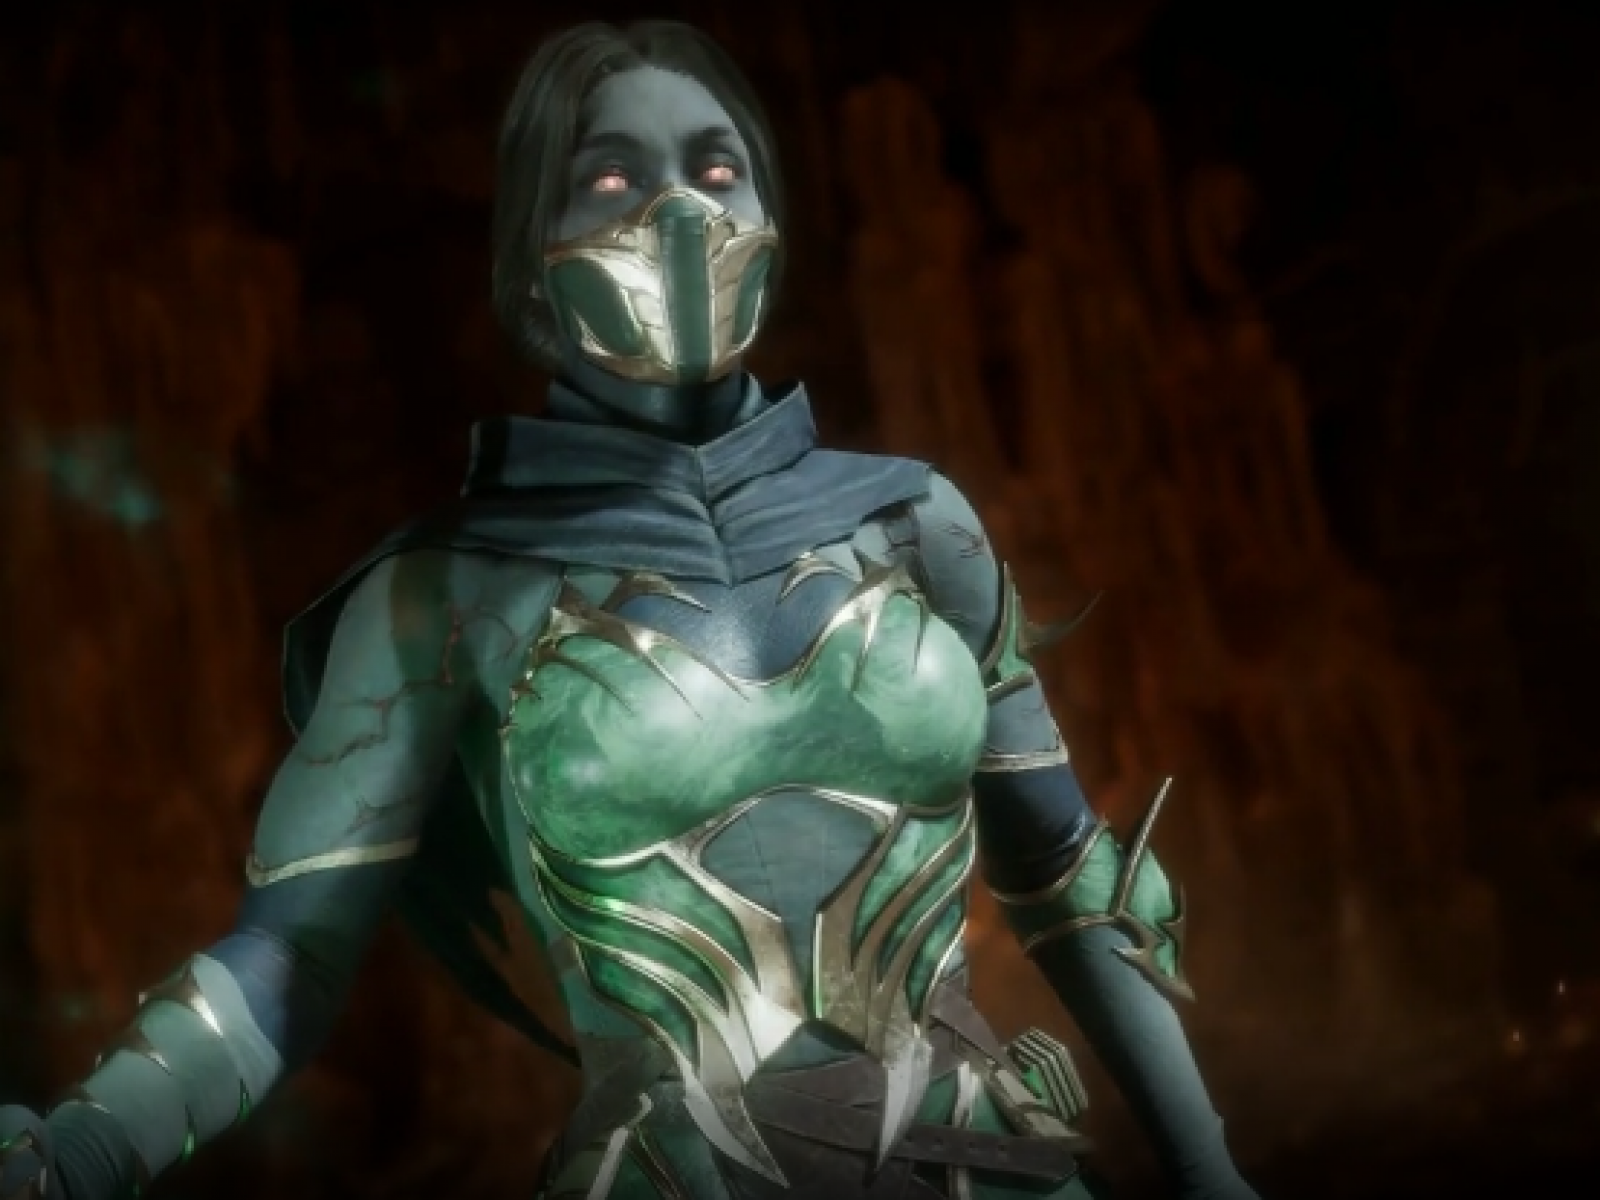 Kano Confirmed to be Appearing in Mortal Kombat 11